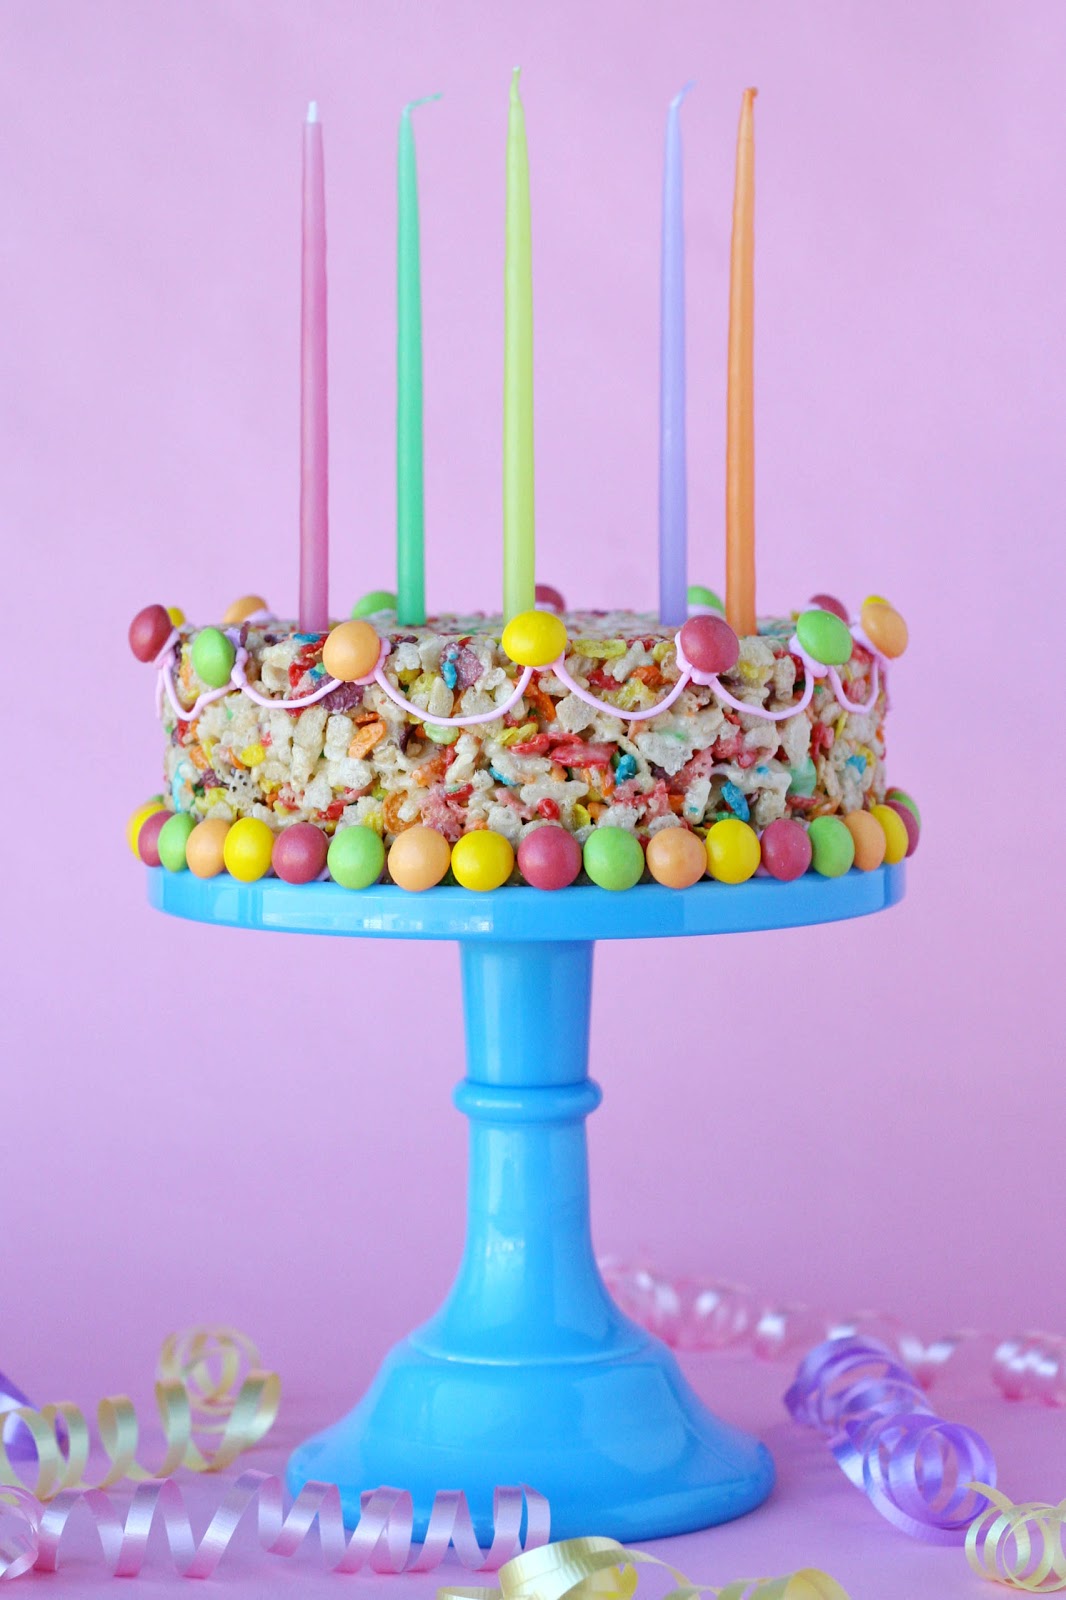 Glorious Treats: {How-to} Make Giant Lollipop Decorations